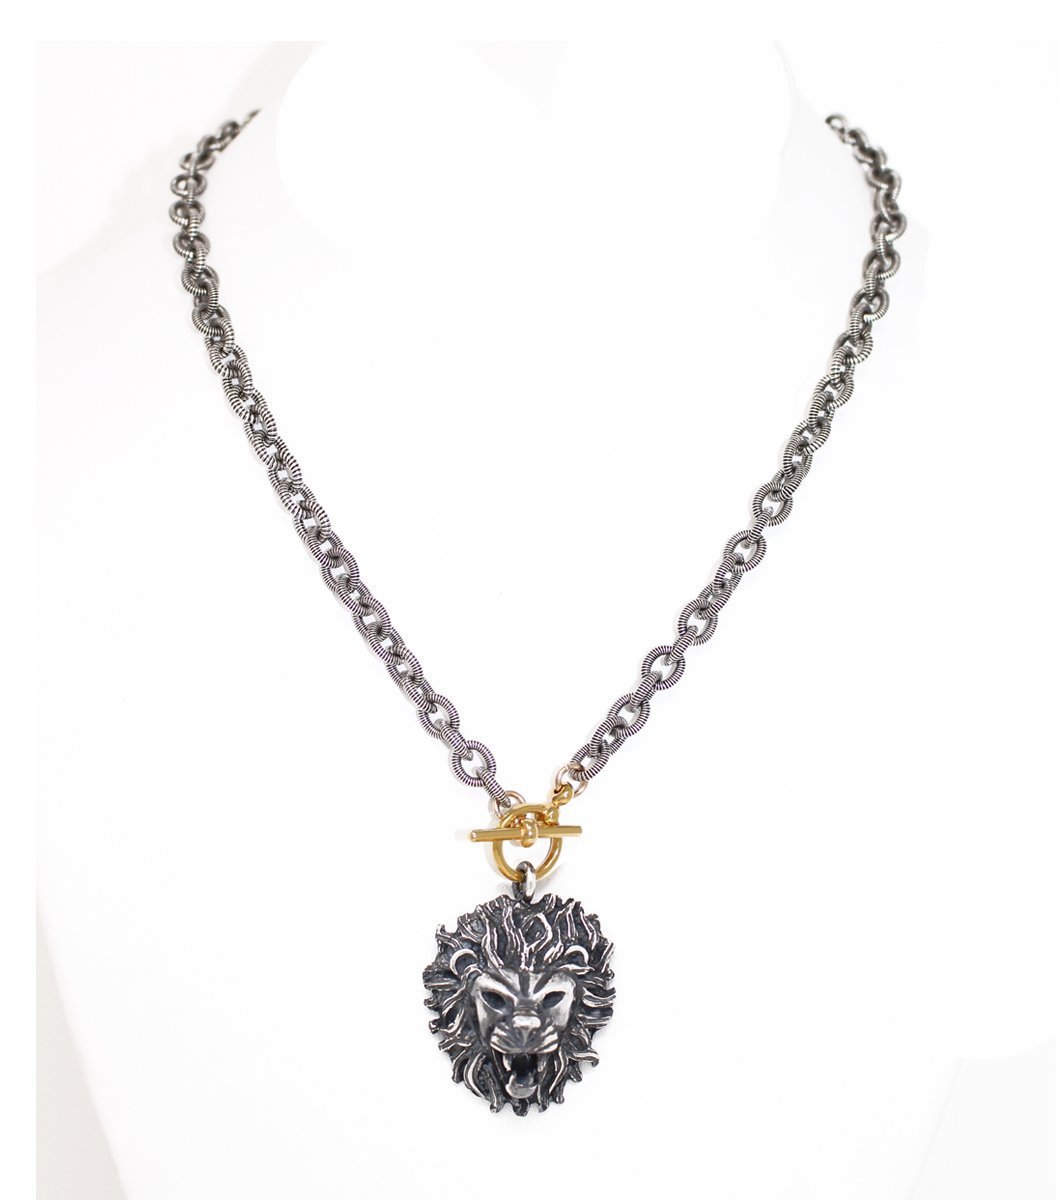 Lion Necklace With Striped Chain - LAURA CANTU JEWELRY US